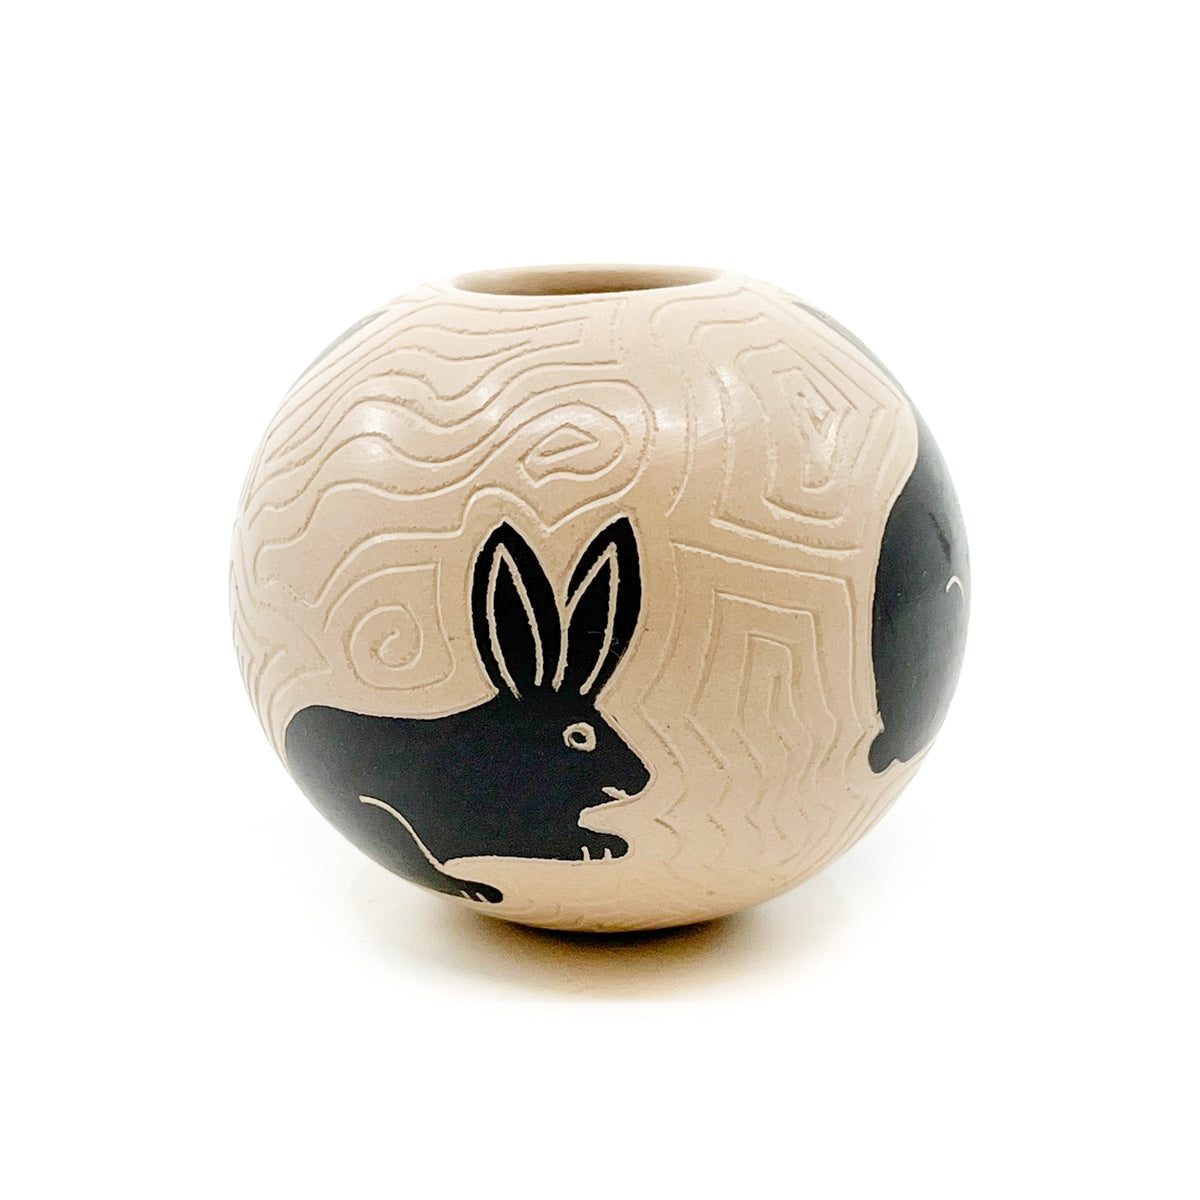 Seed Pot with Black Bunnies on White Clay